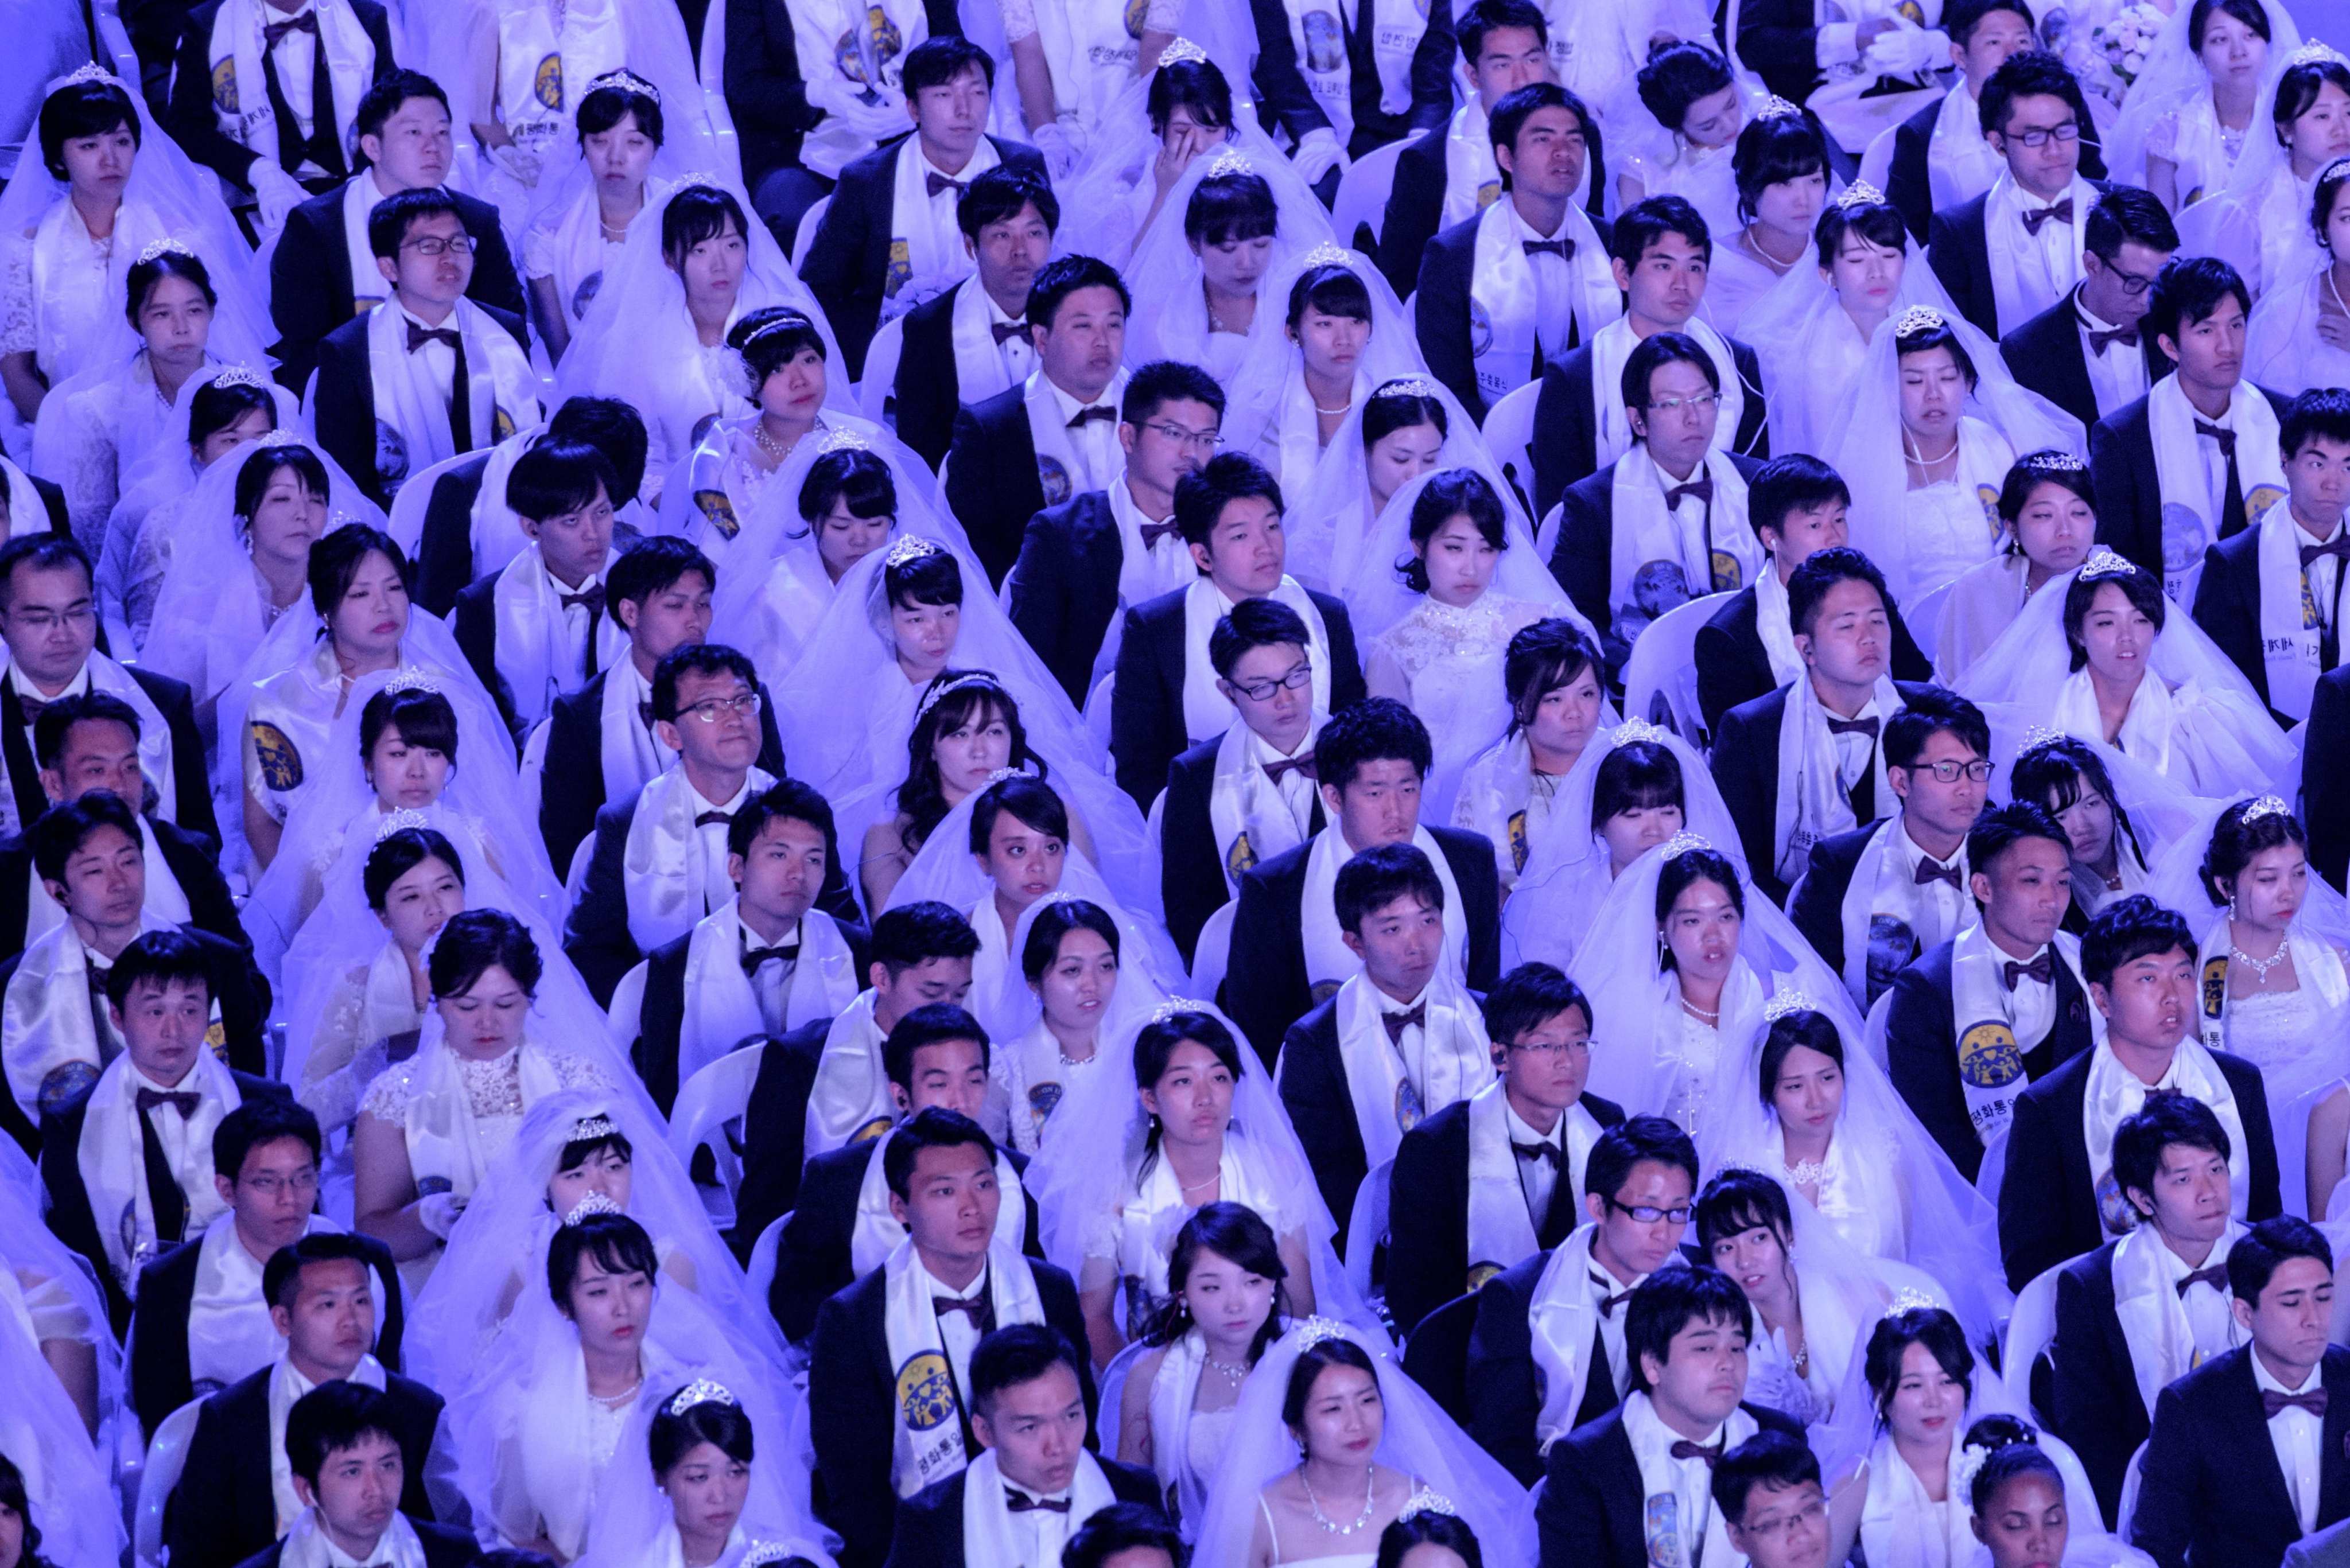 Couples from the Unification Church attend a mass wedding ceremony. Photo: AFP